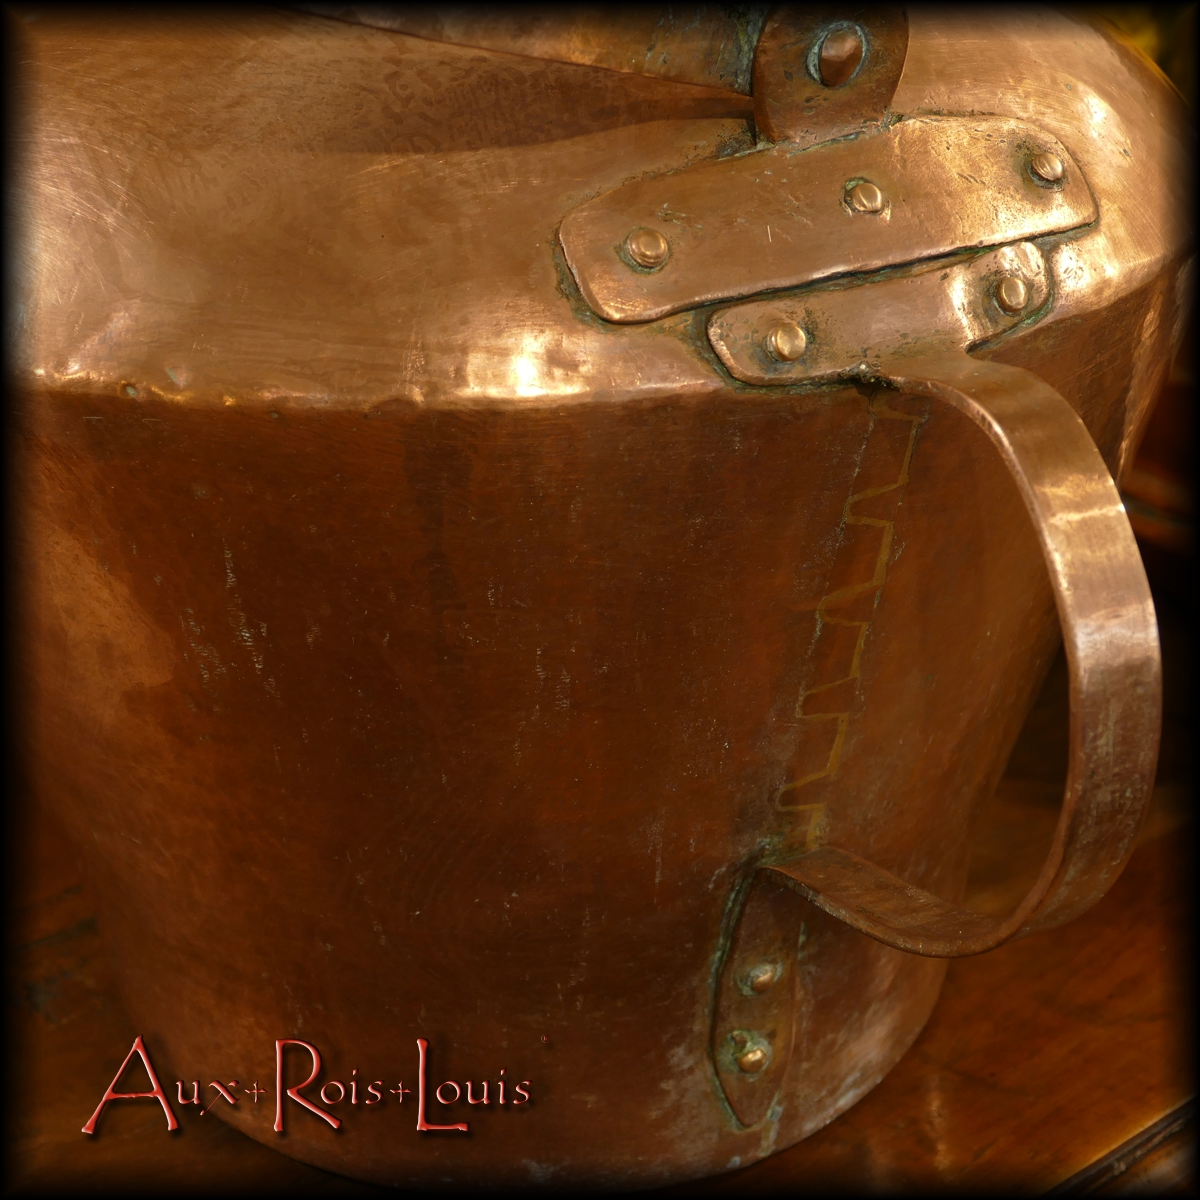 We can see under the handle of a large red copper kettle from the 18th century, the way its belly has been welded. Slotted "straight tails" were cut from either side of a hammered sheet of copper, then soldered face to face with hot brass.